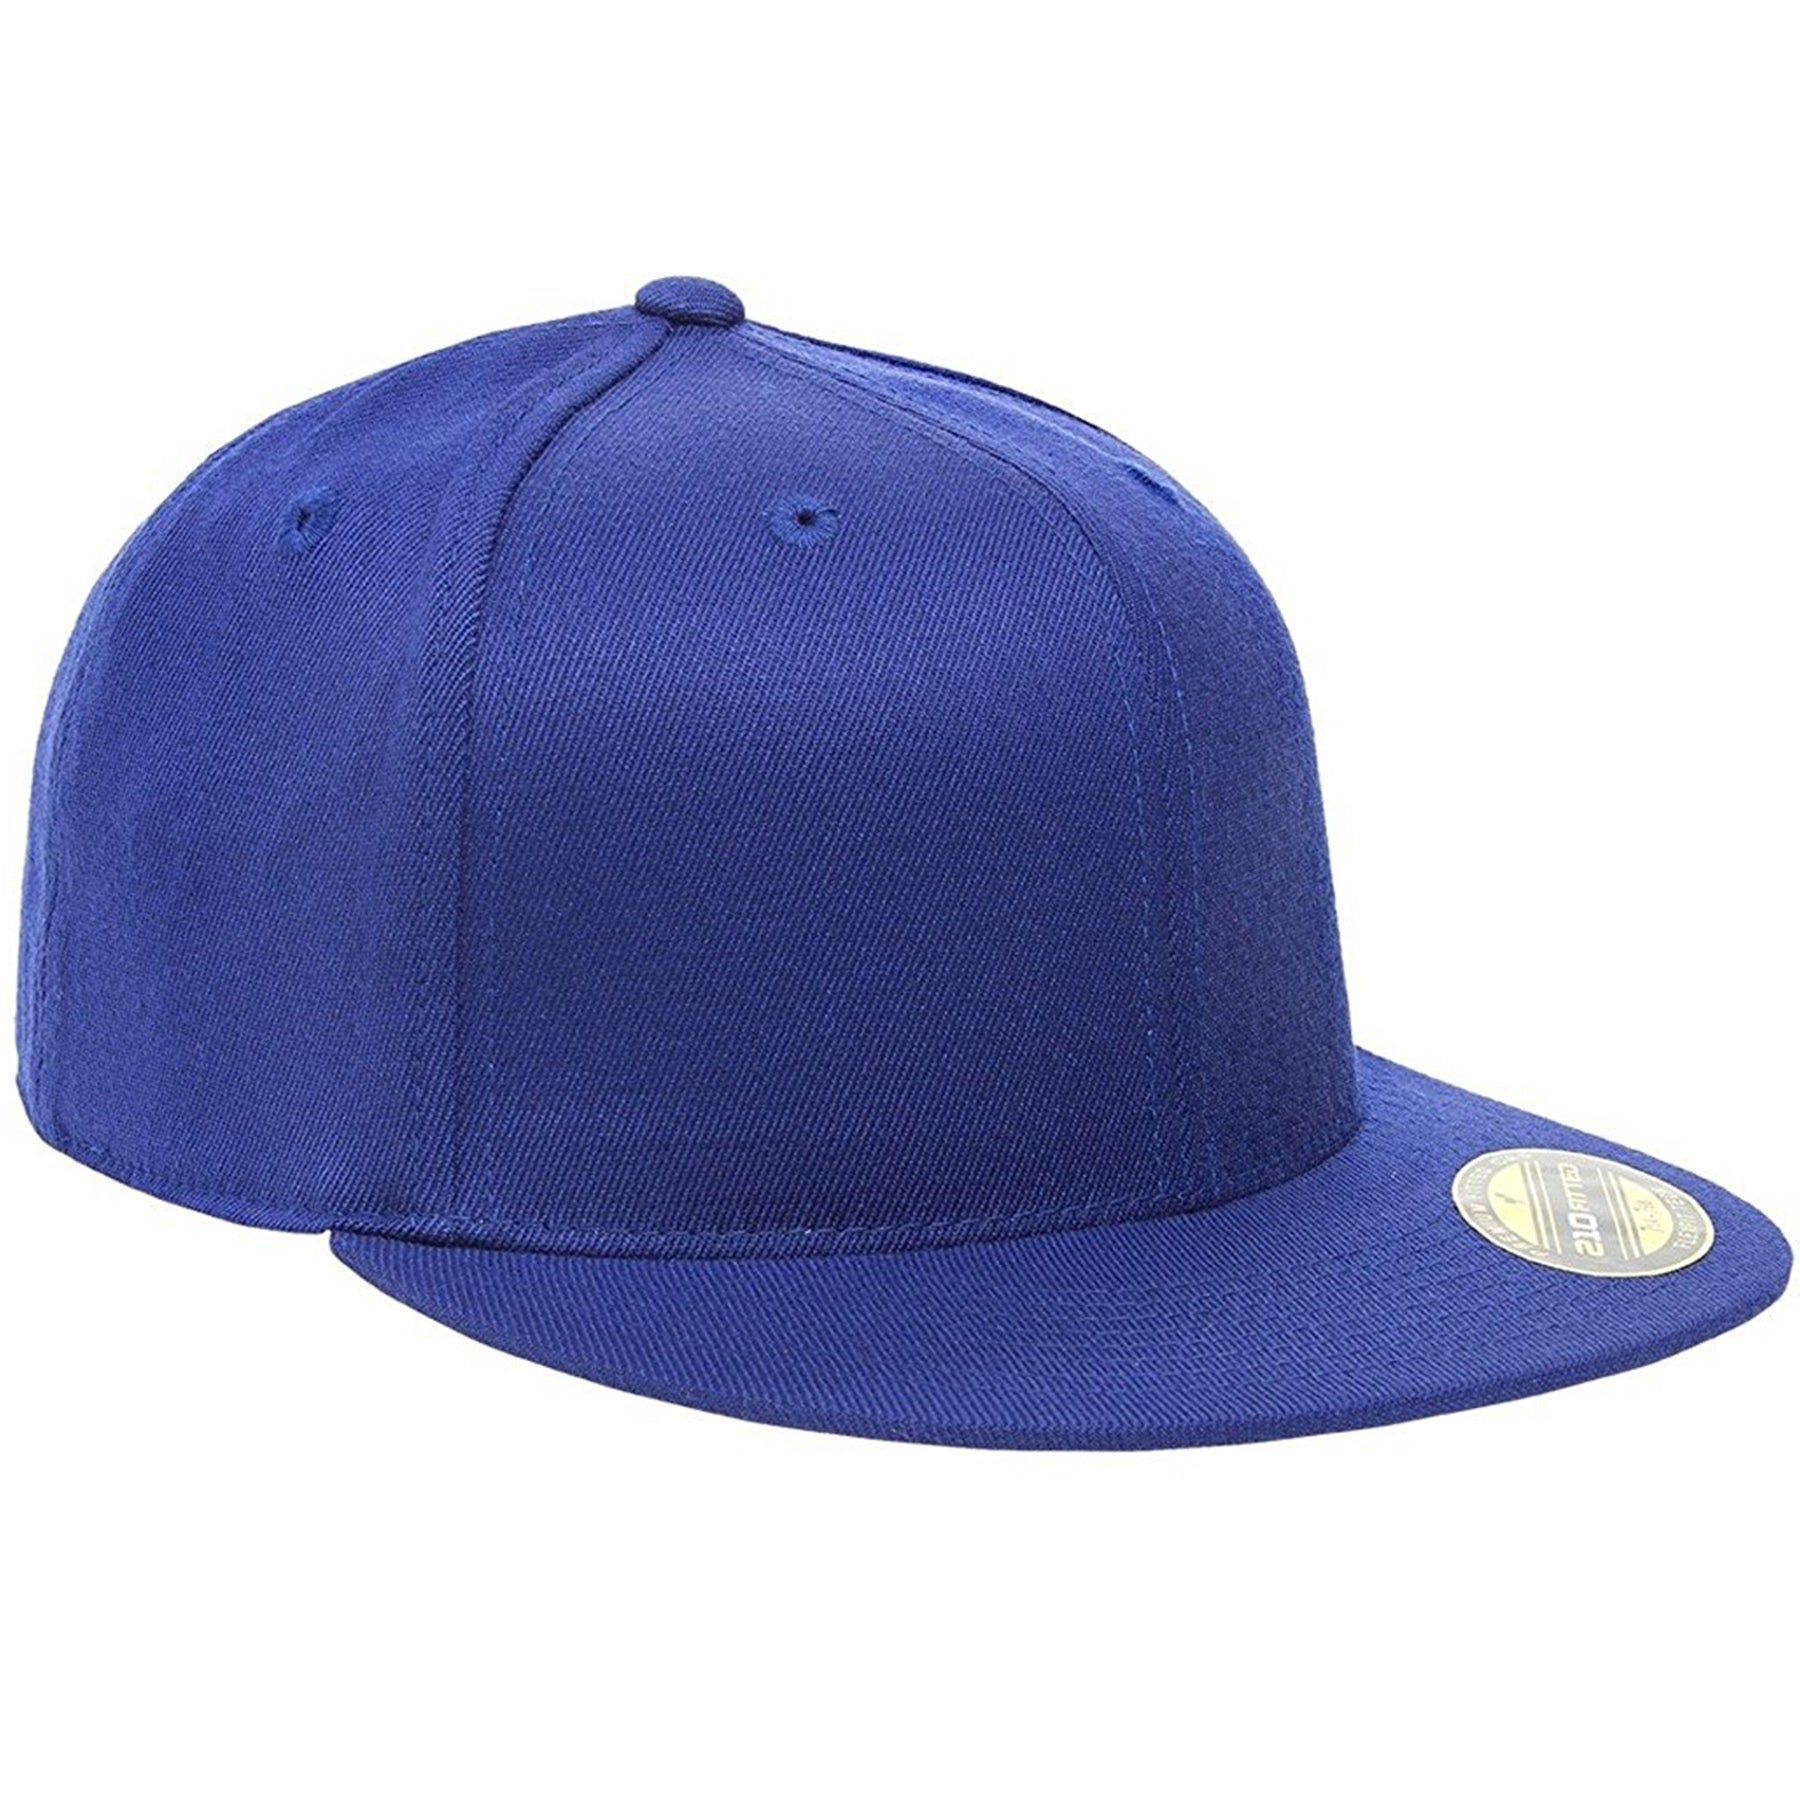 Blank light blue fitted hat - apomai